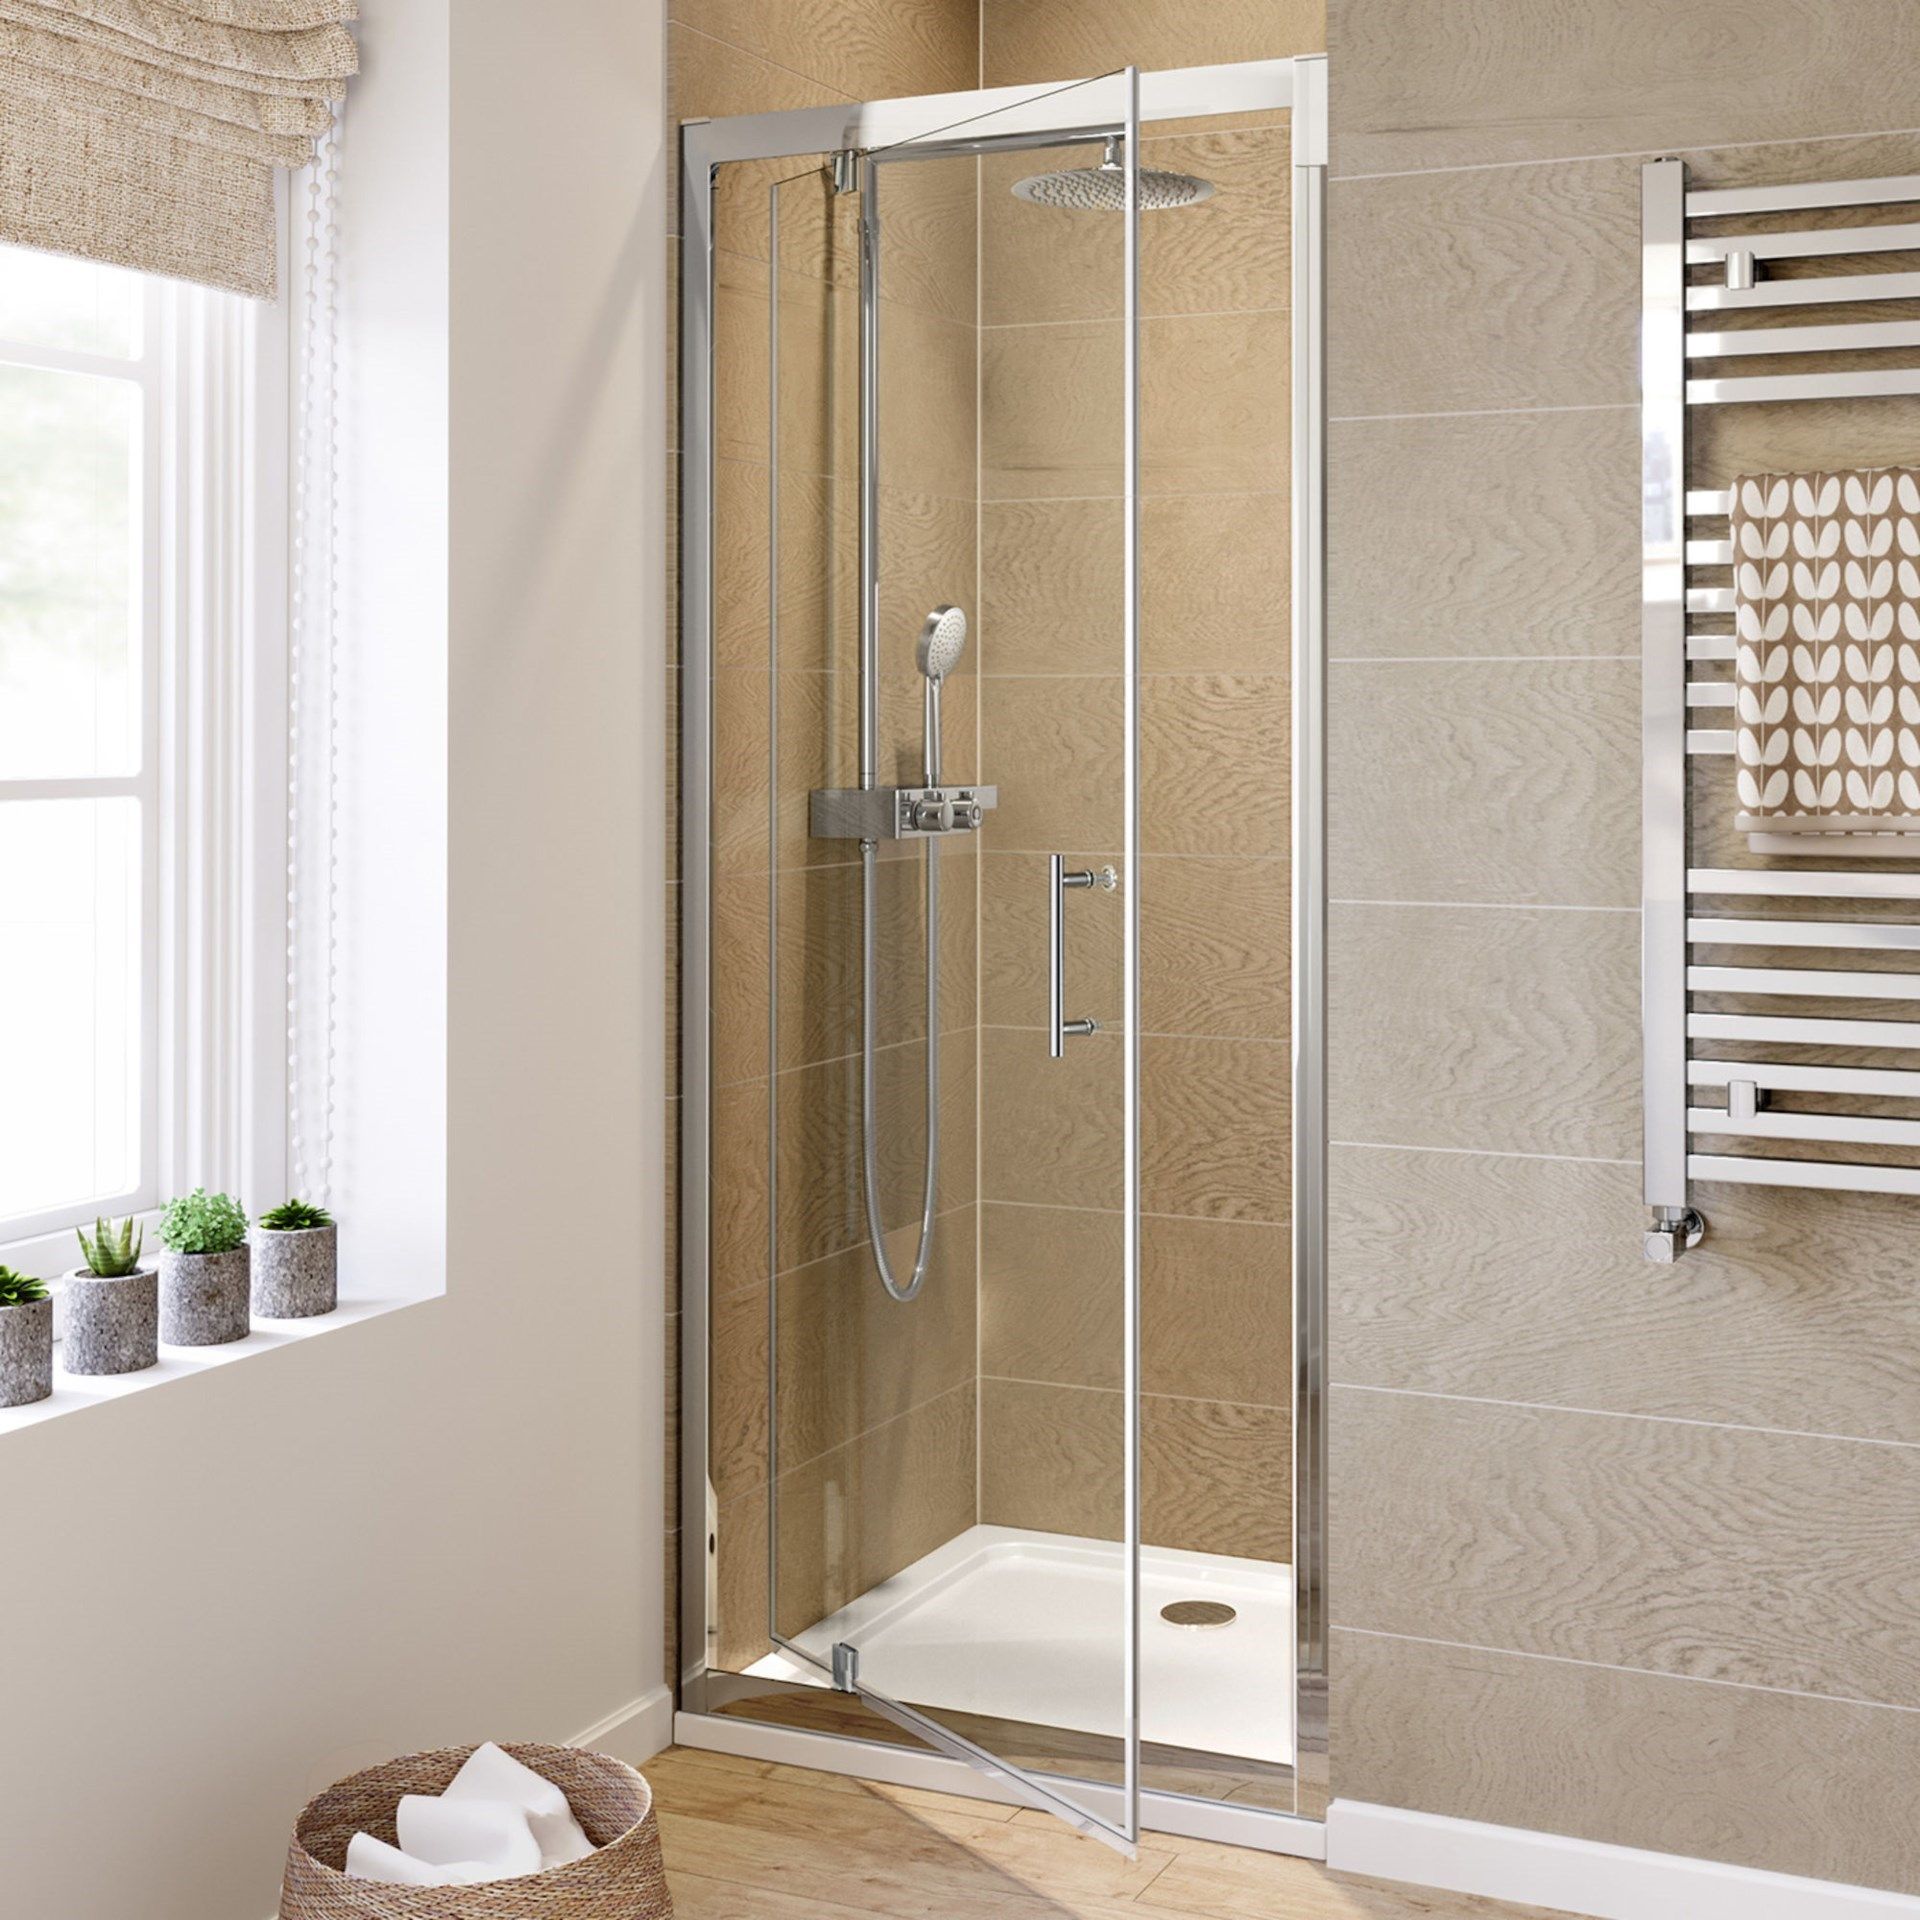 Twyfords 700mm - 6mm - Premium Pivot Shower Door. RRP £339.99.8mm Safety Glass Fully waterproo... - Image 2 of 3